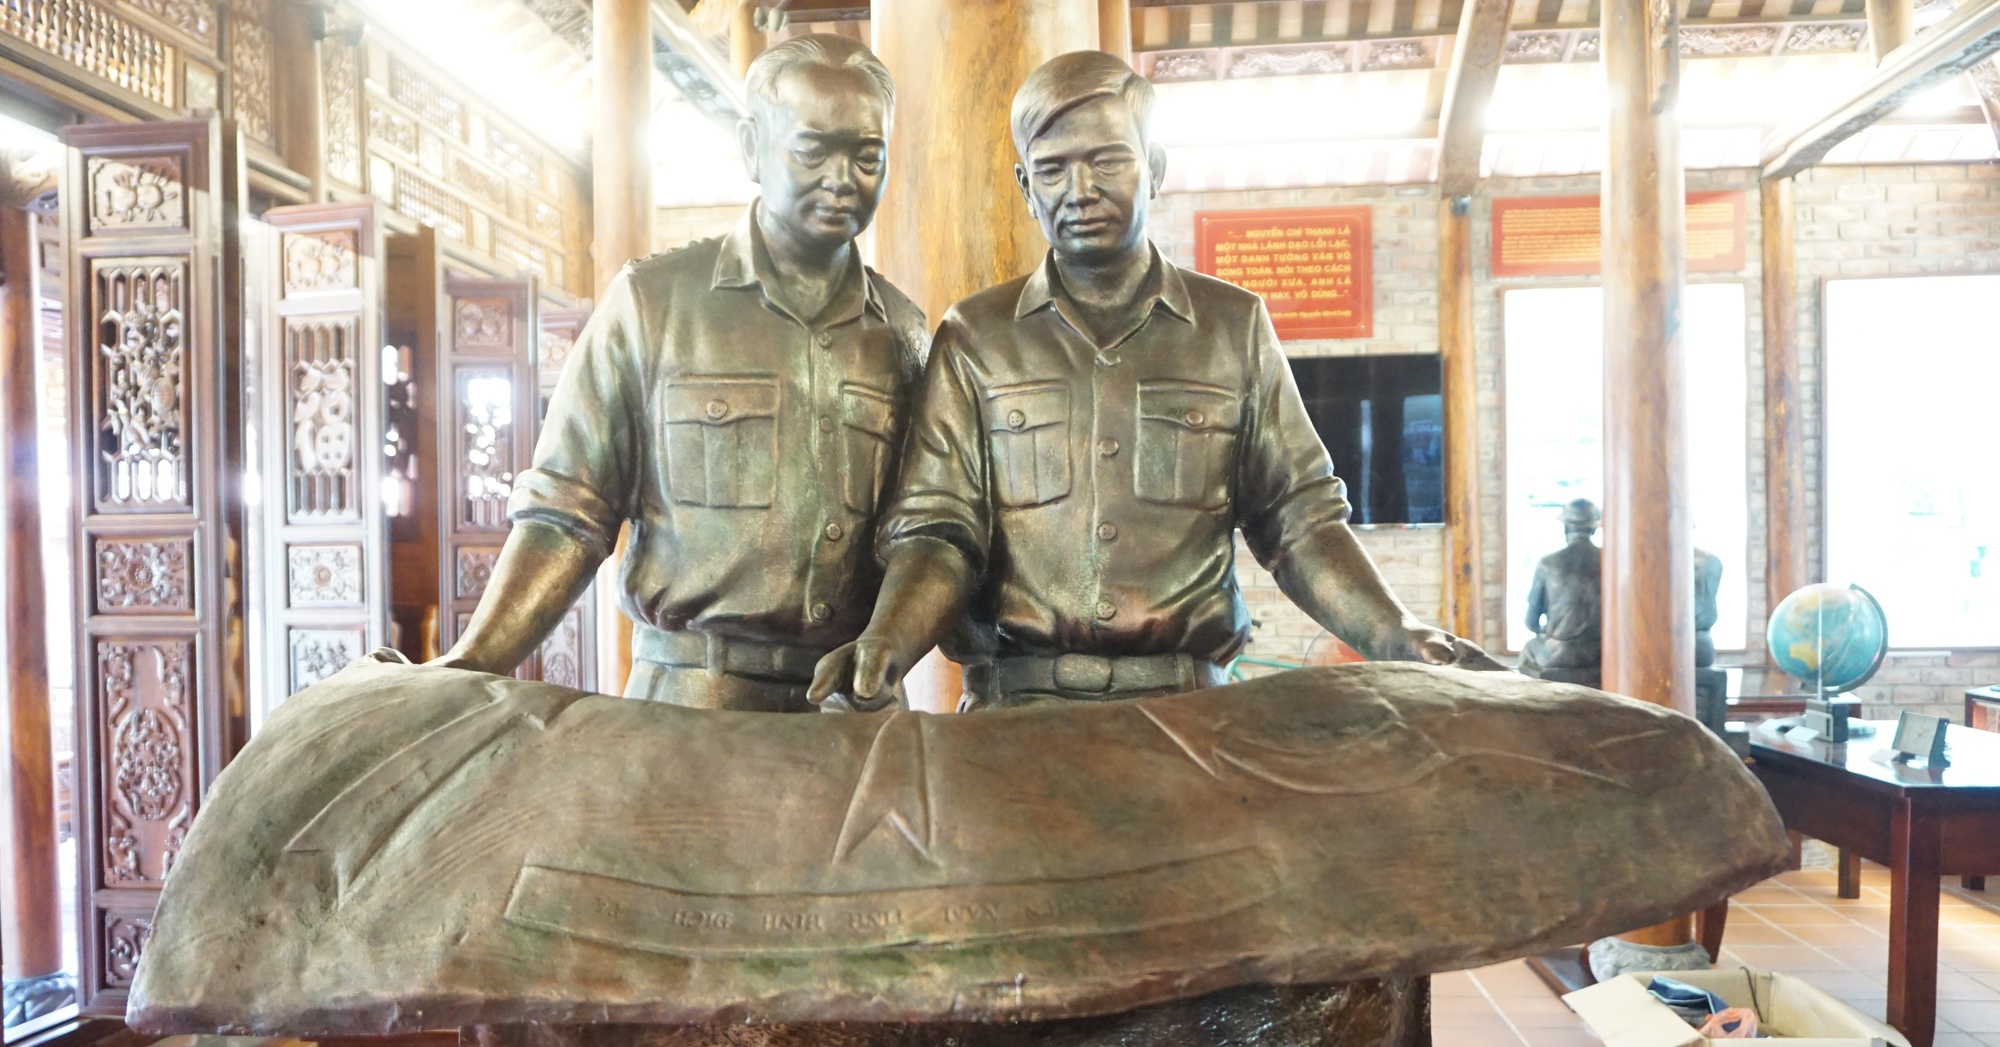 Thua Thien Hue allows the operation of General Nguyen Chi Thanh Museum